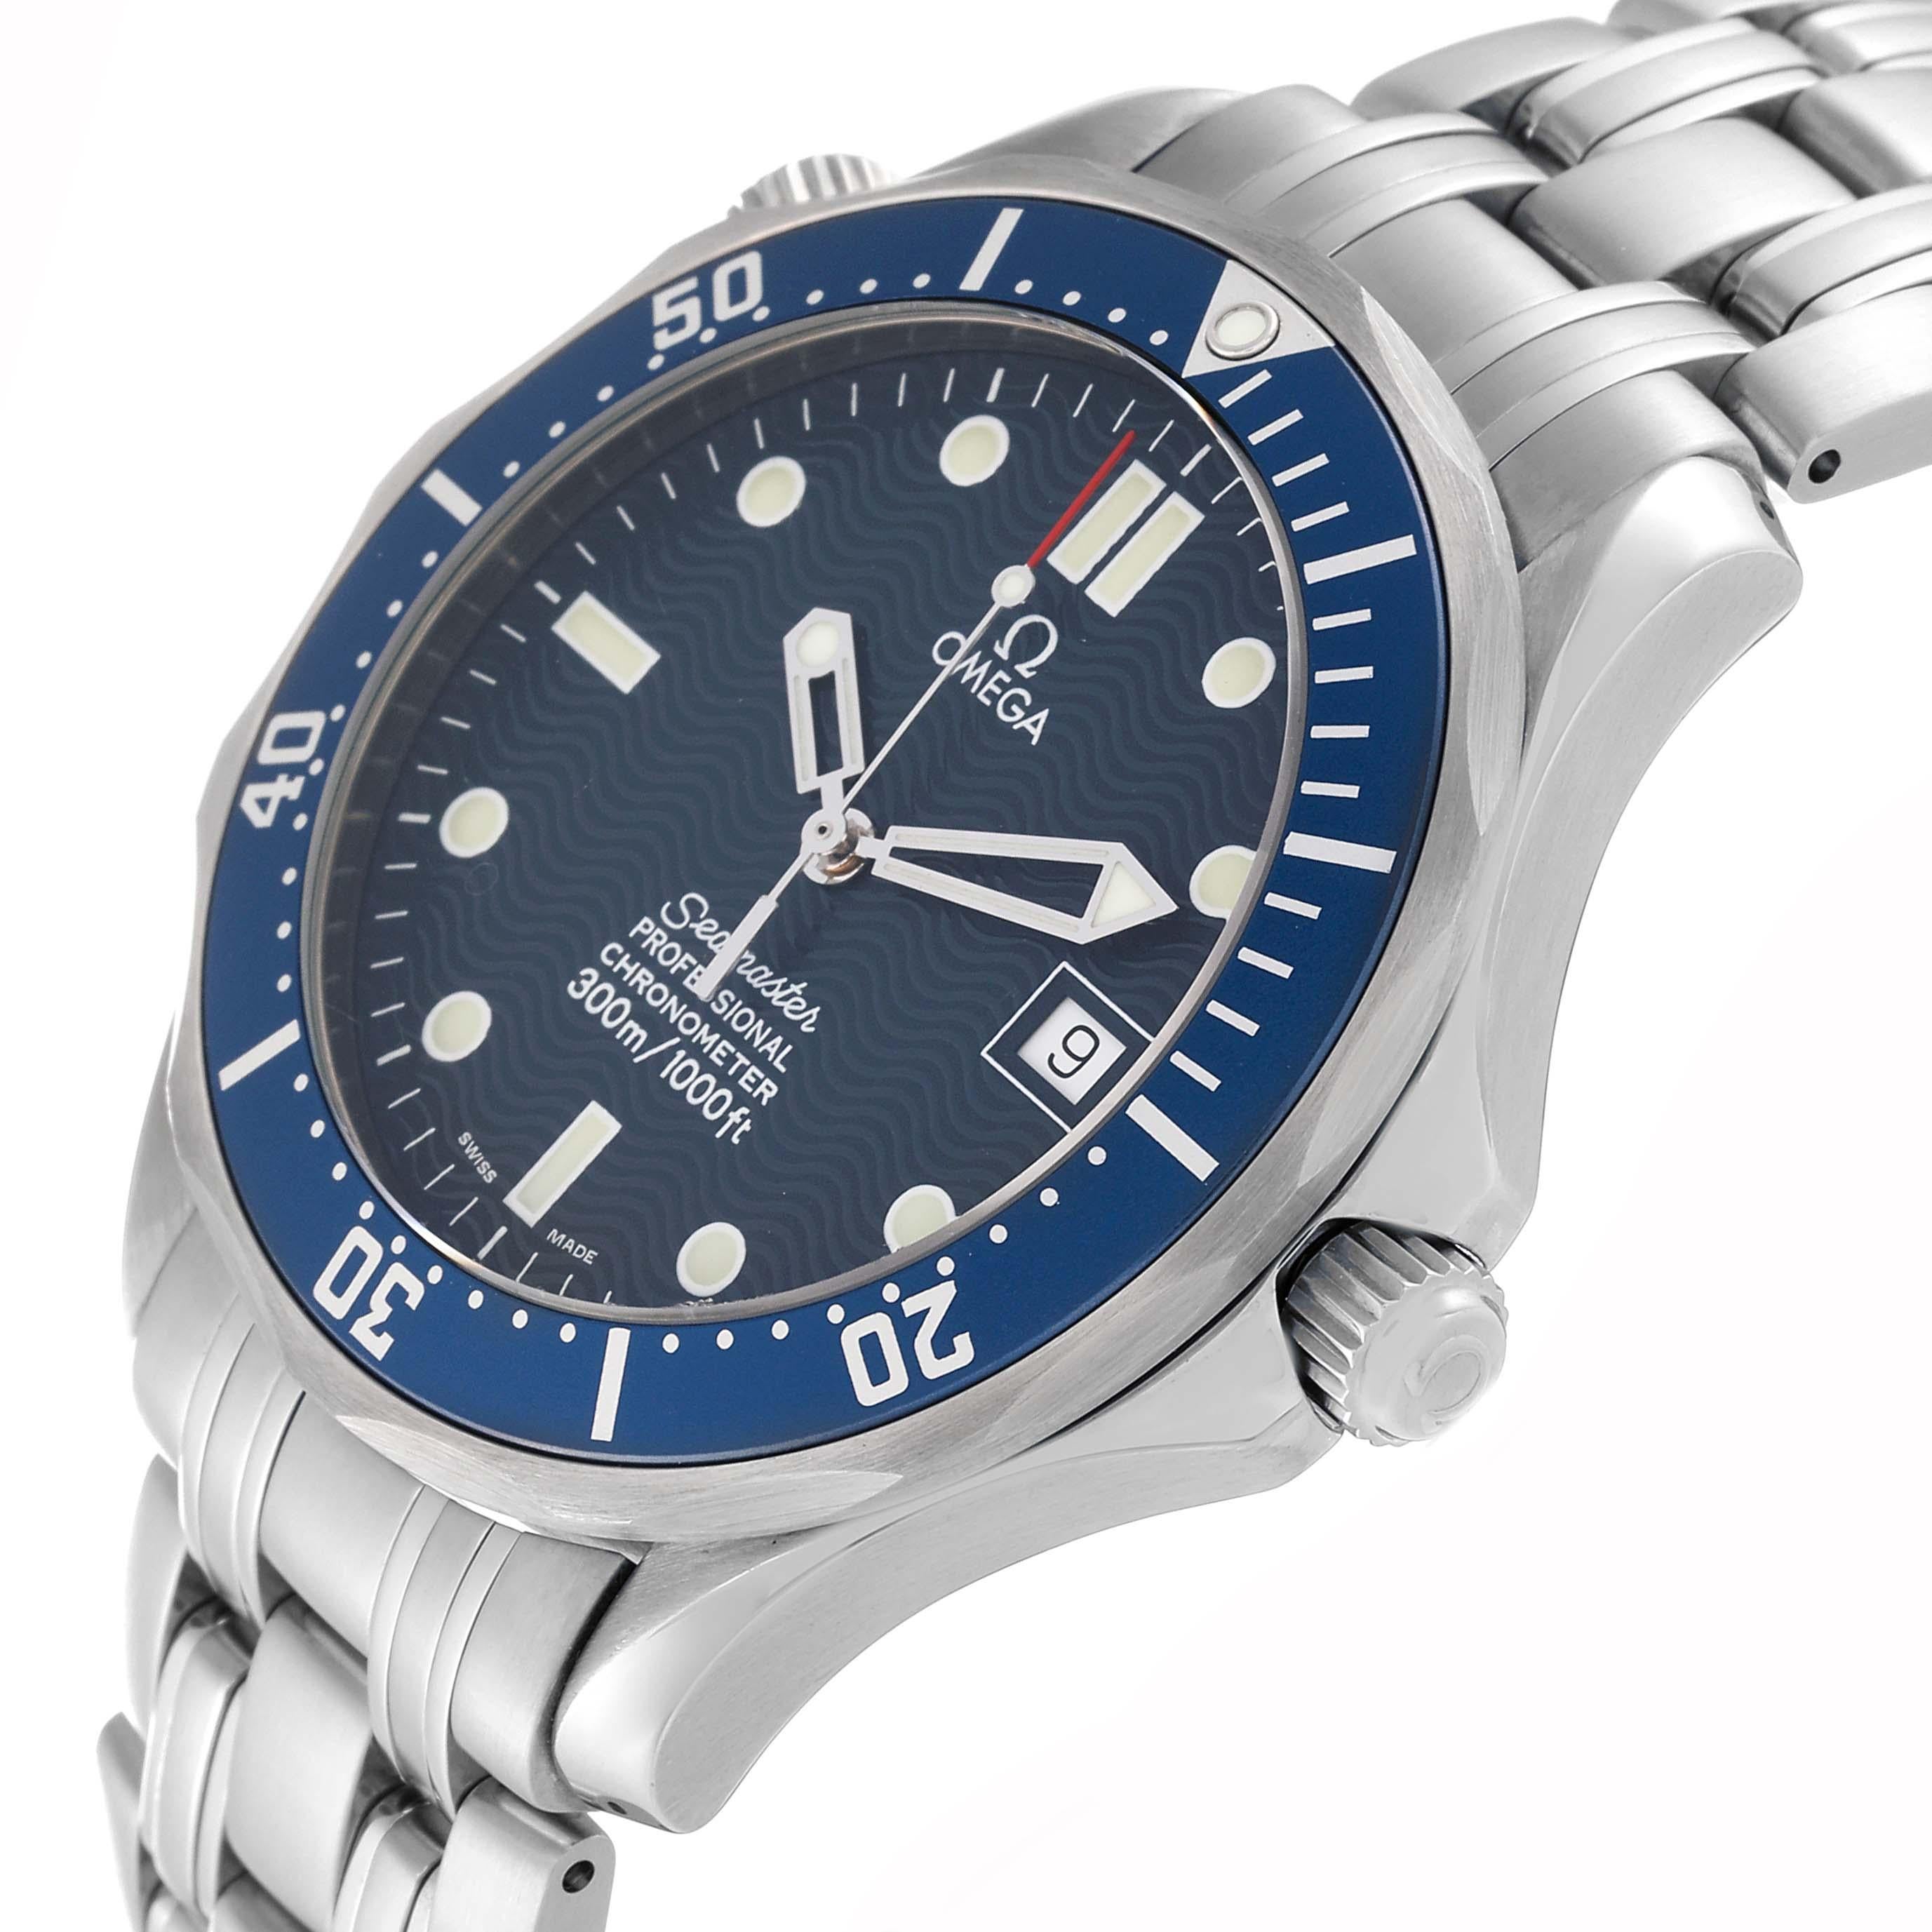 Omega Seamaster Diver 300M Blue Dial Steel Mens Watch 2531.80.00. Automatic self-winding movement. Stainless steel case 41.0 mm in diameter. Omega logo on the crown. Helium escape valve at 10 o'clock. Blue unidirectional rotating bezel. Scratch